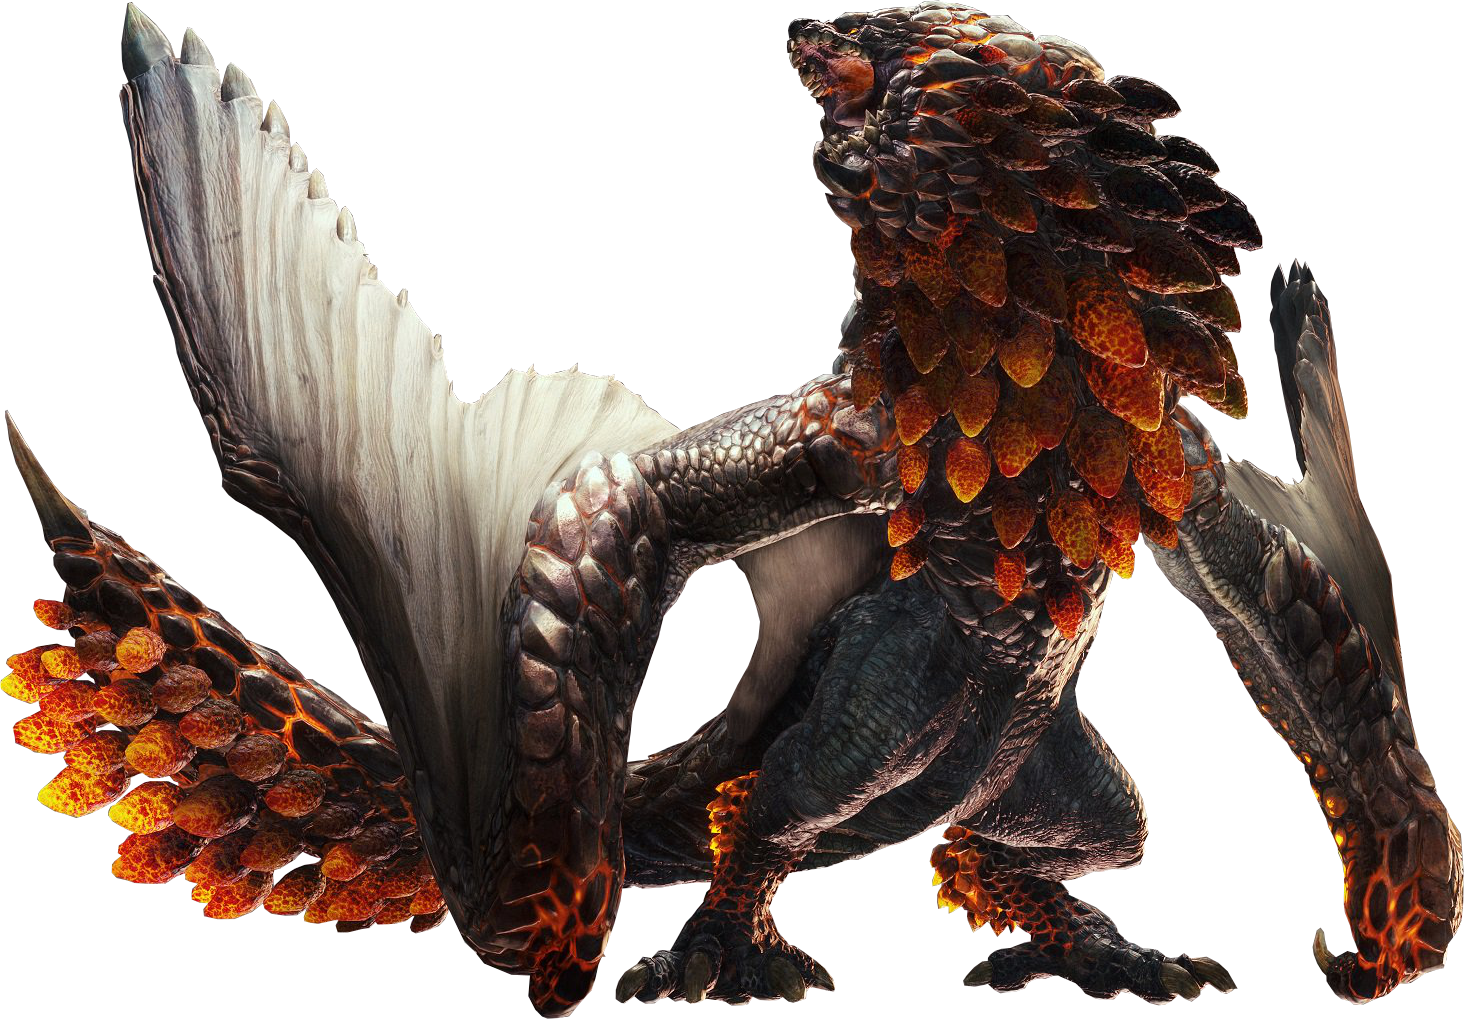 the official render of Bazelgeuse, a dragon from Monster Hunter Rise. it has a grey body and wings with a lion-like head and countless red-hot scales around its neck and tail